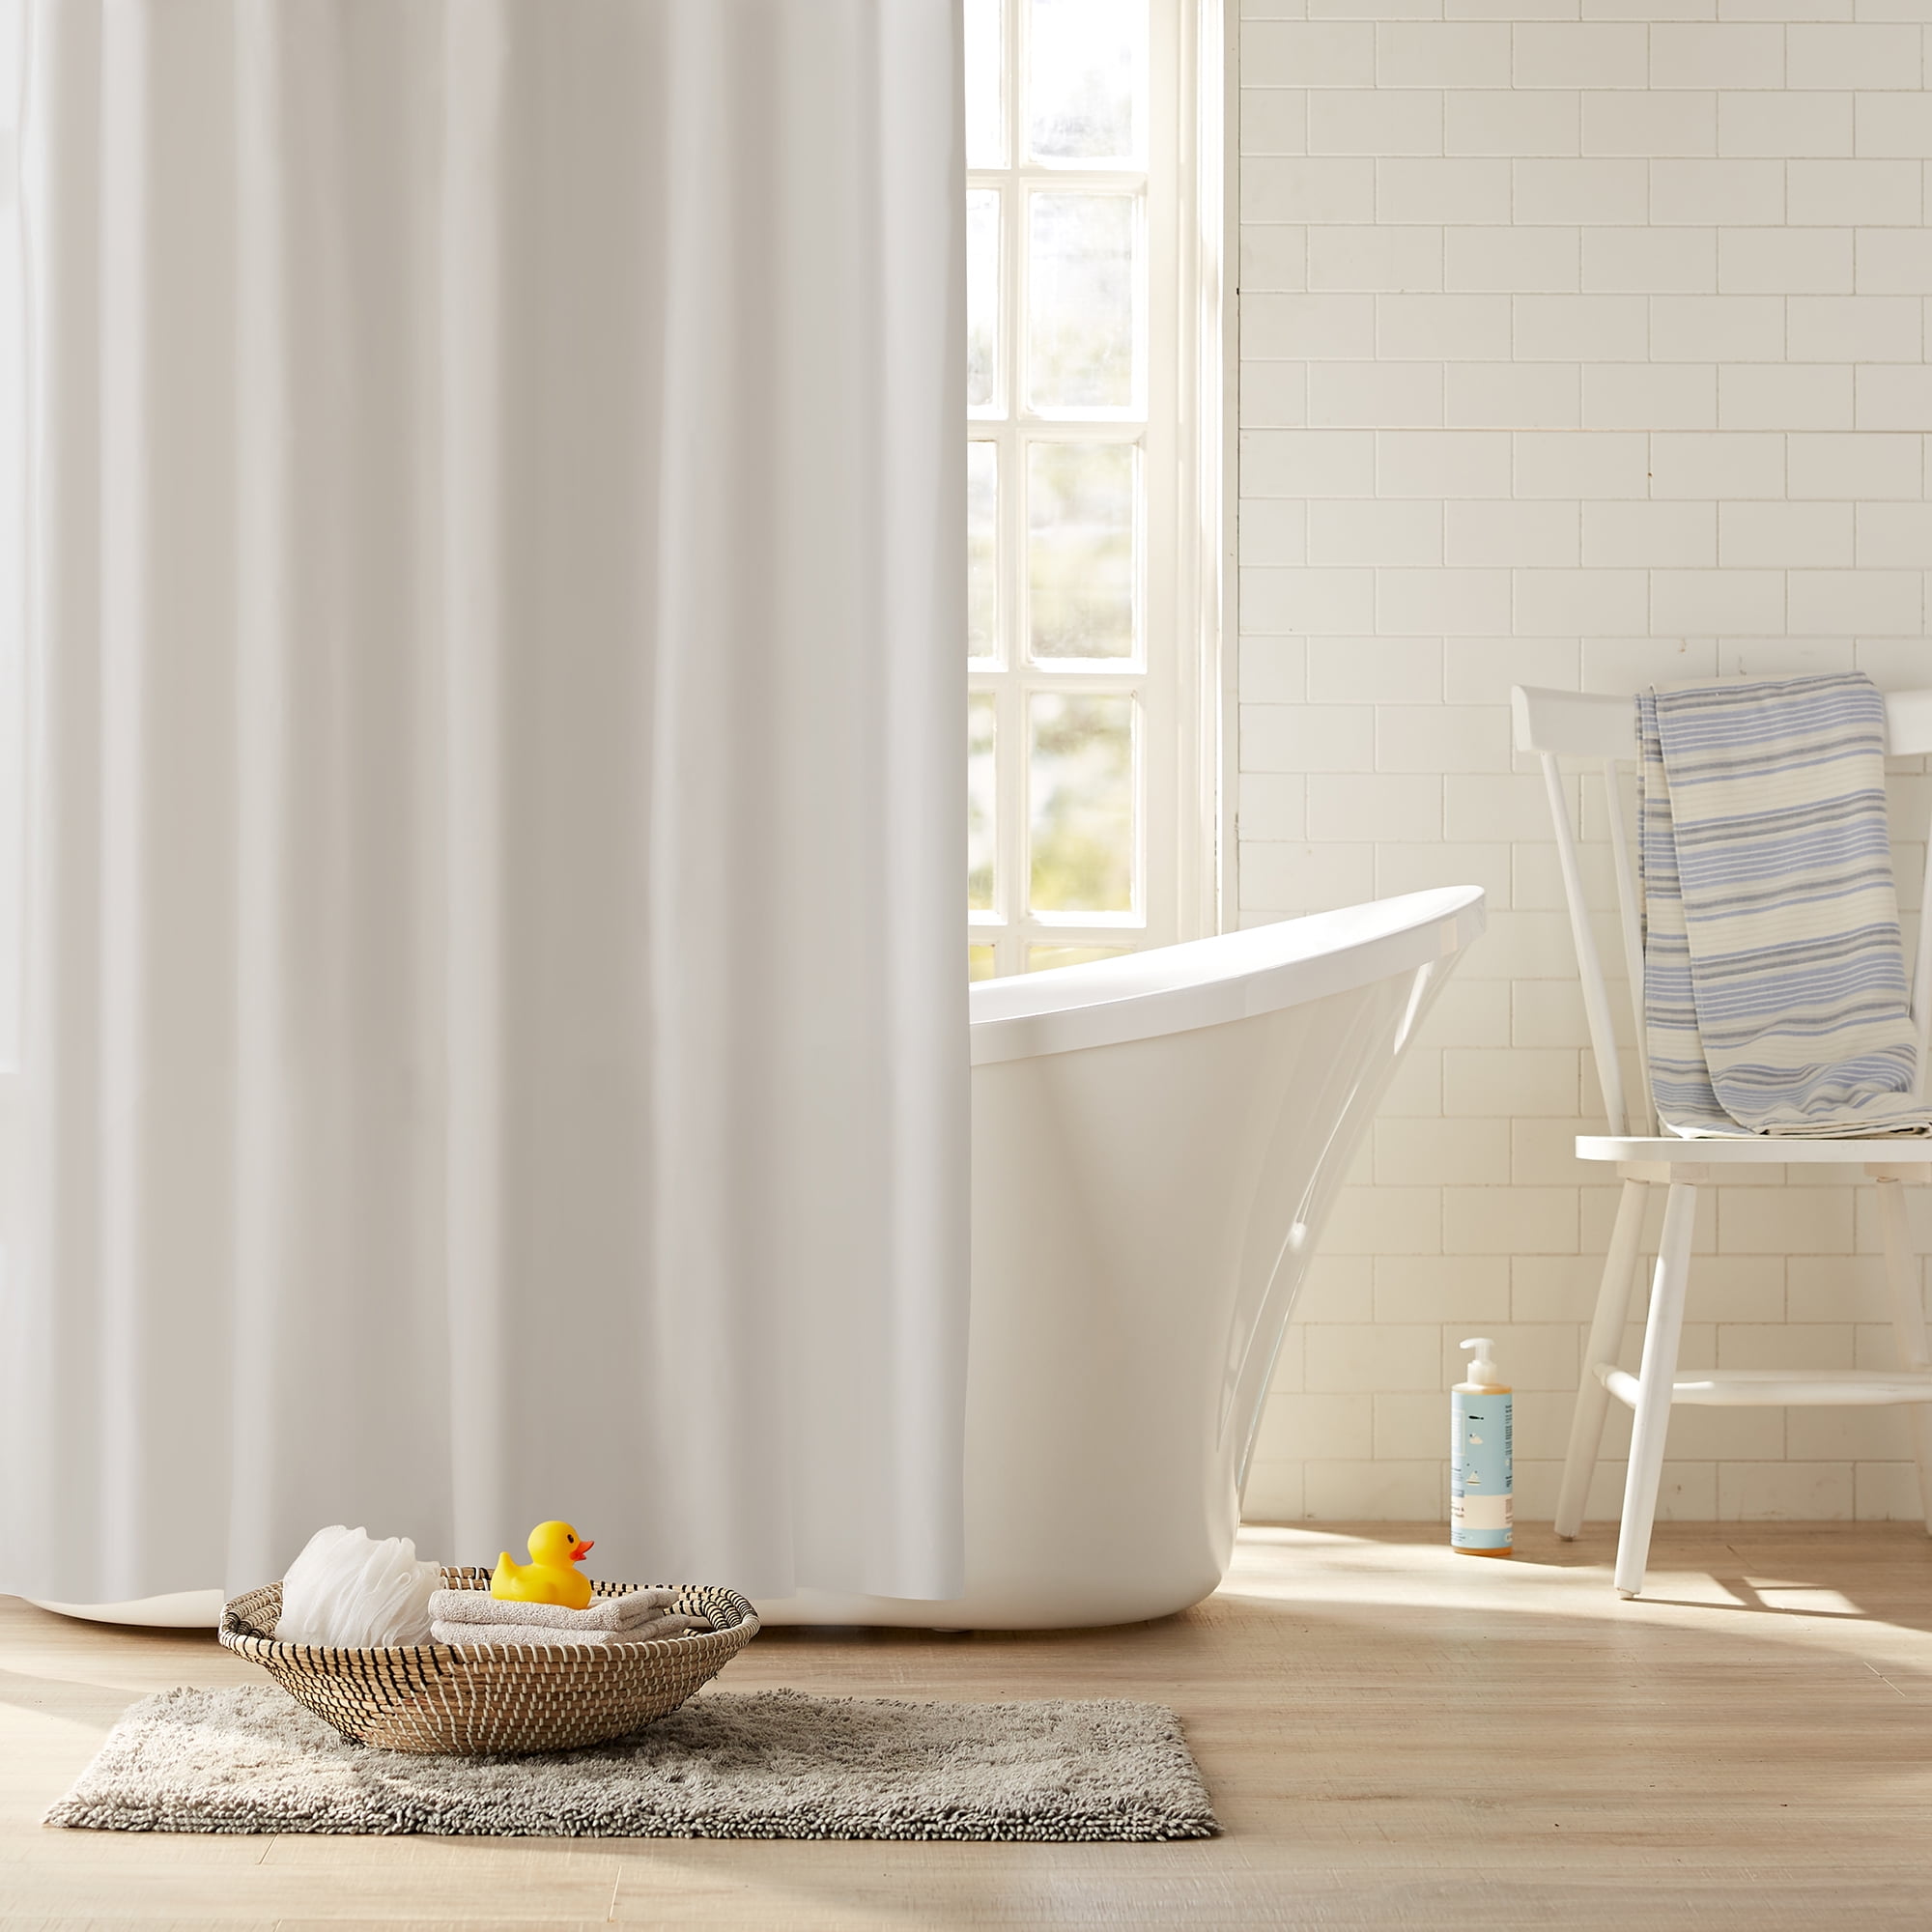 Details about   Circle Power Waterproof Bathroom Polyester Shower Curtain Liner Water Resistant 